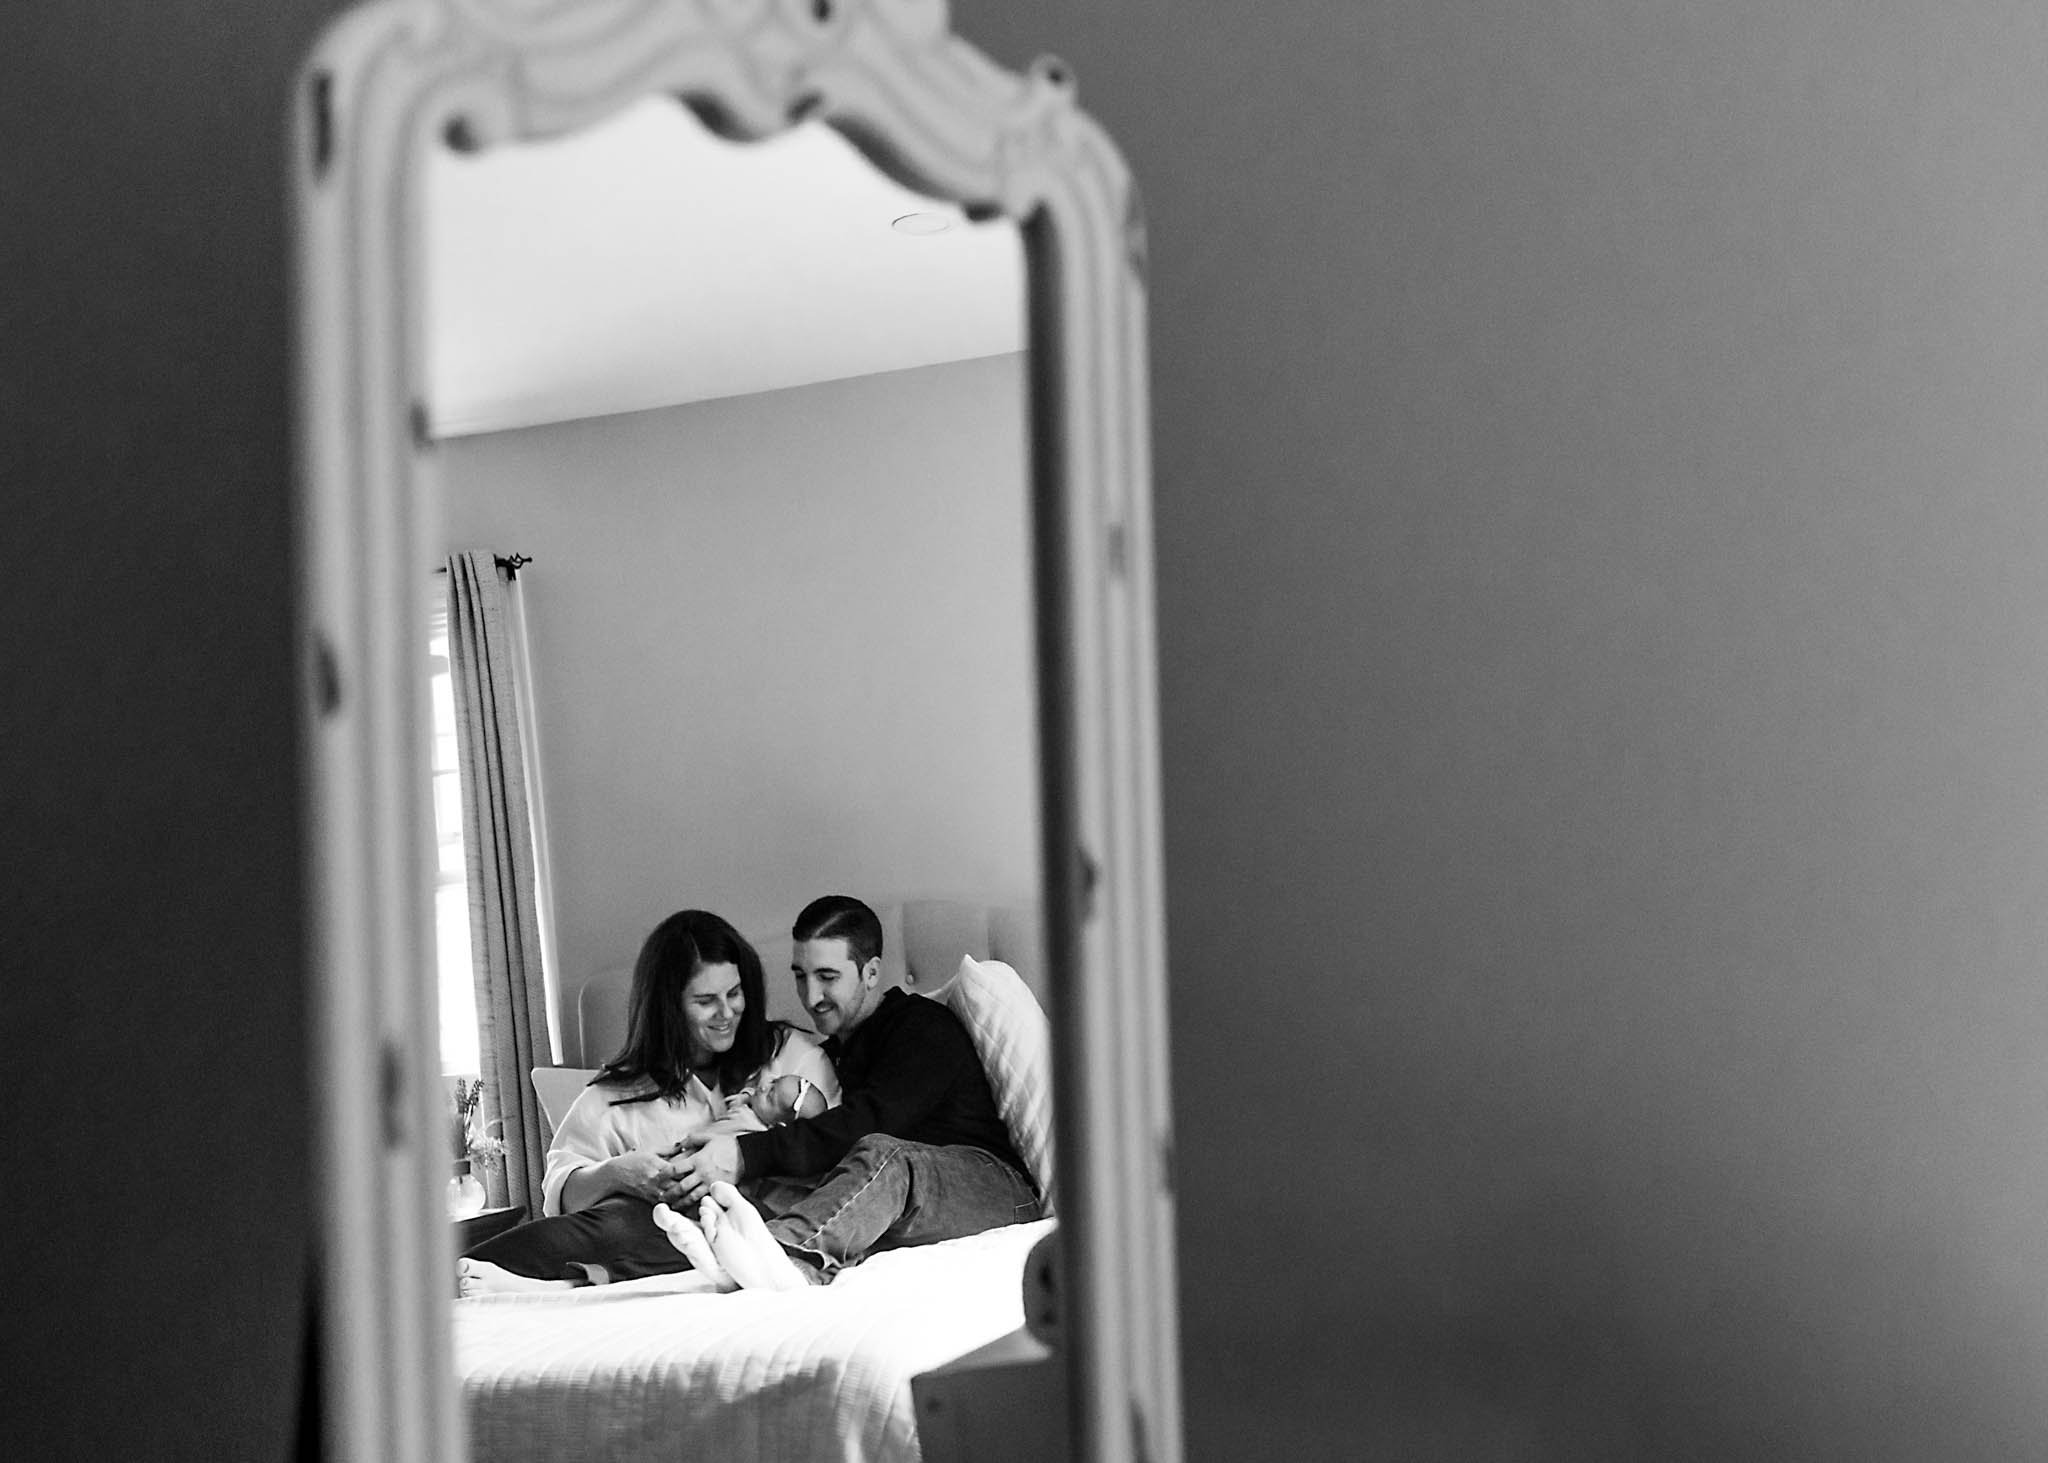 Mirror reflection of parents and baby on bed